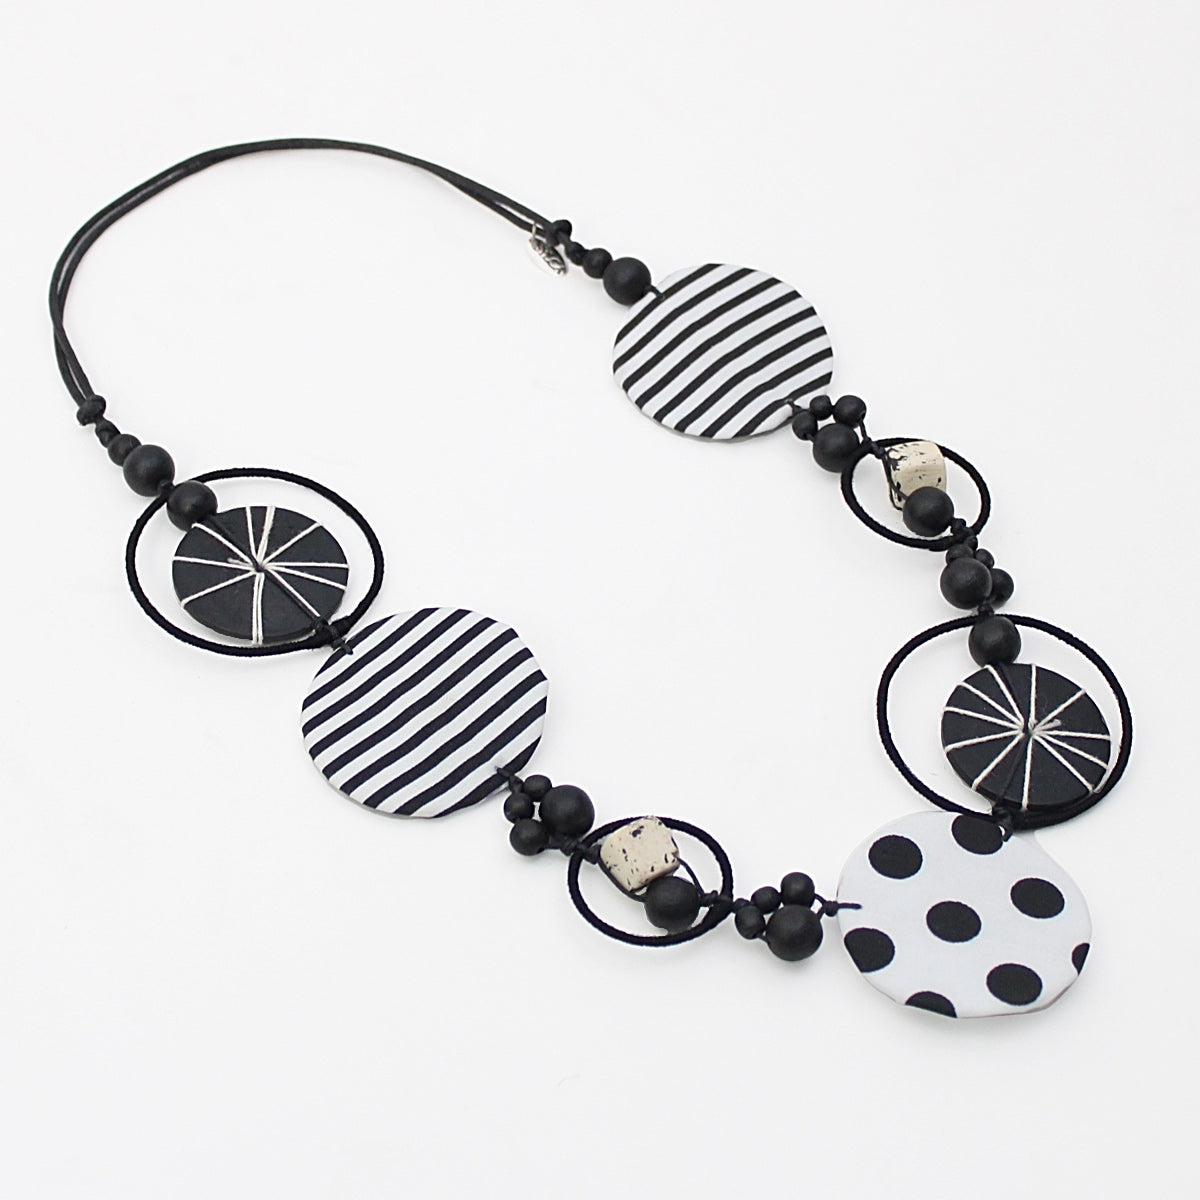 Black and White Fabric Disk Marina Necklace